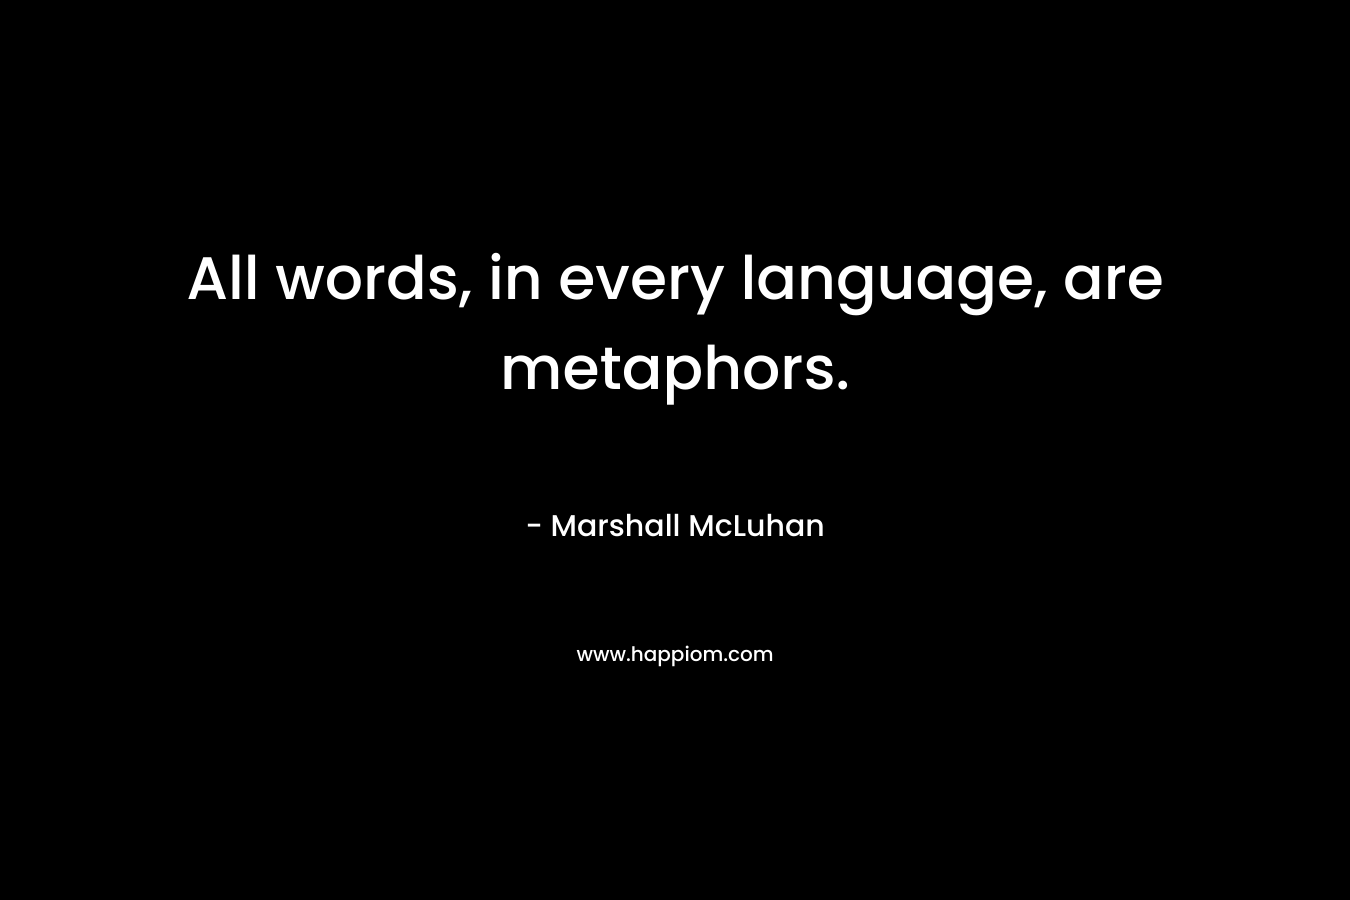 All words, in every language, are metaphors. – Marshall McLuhan